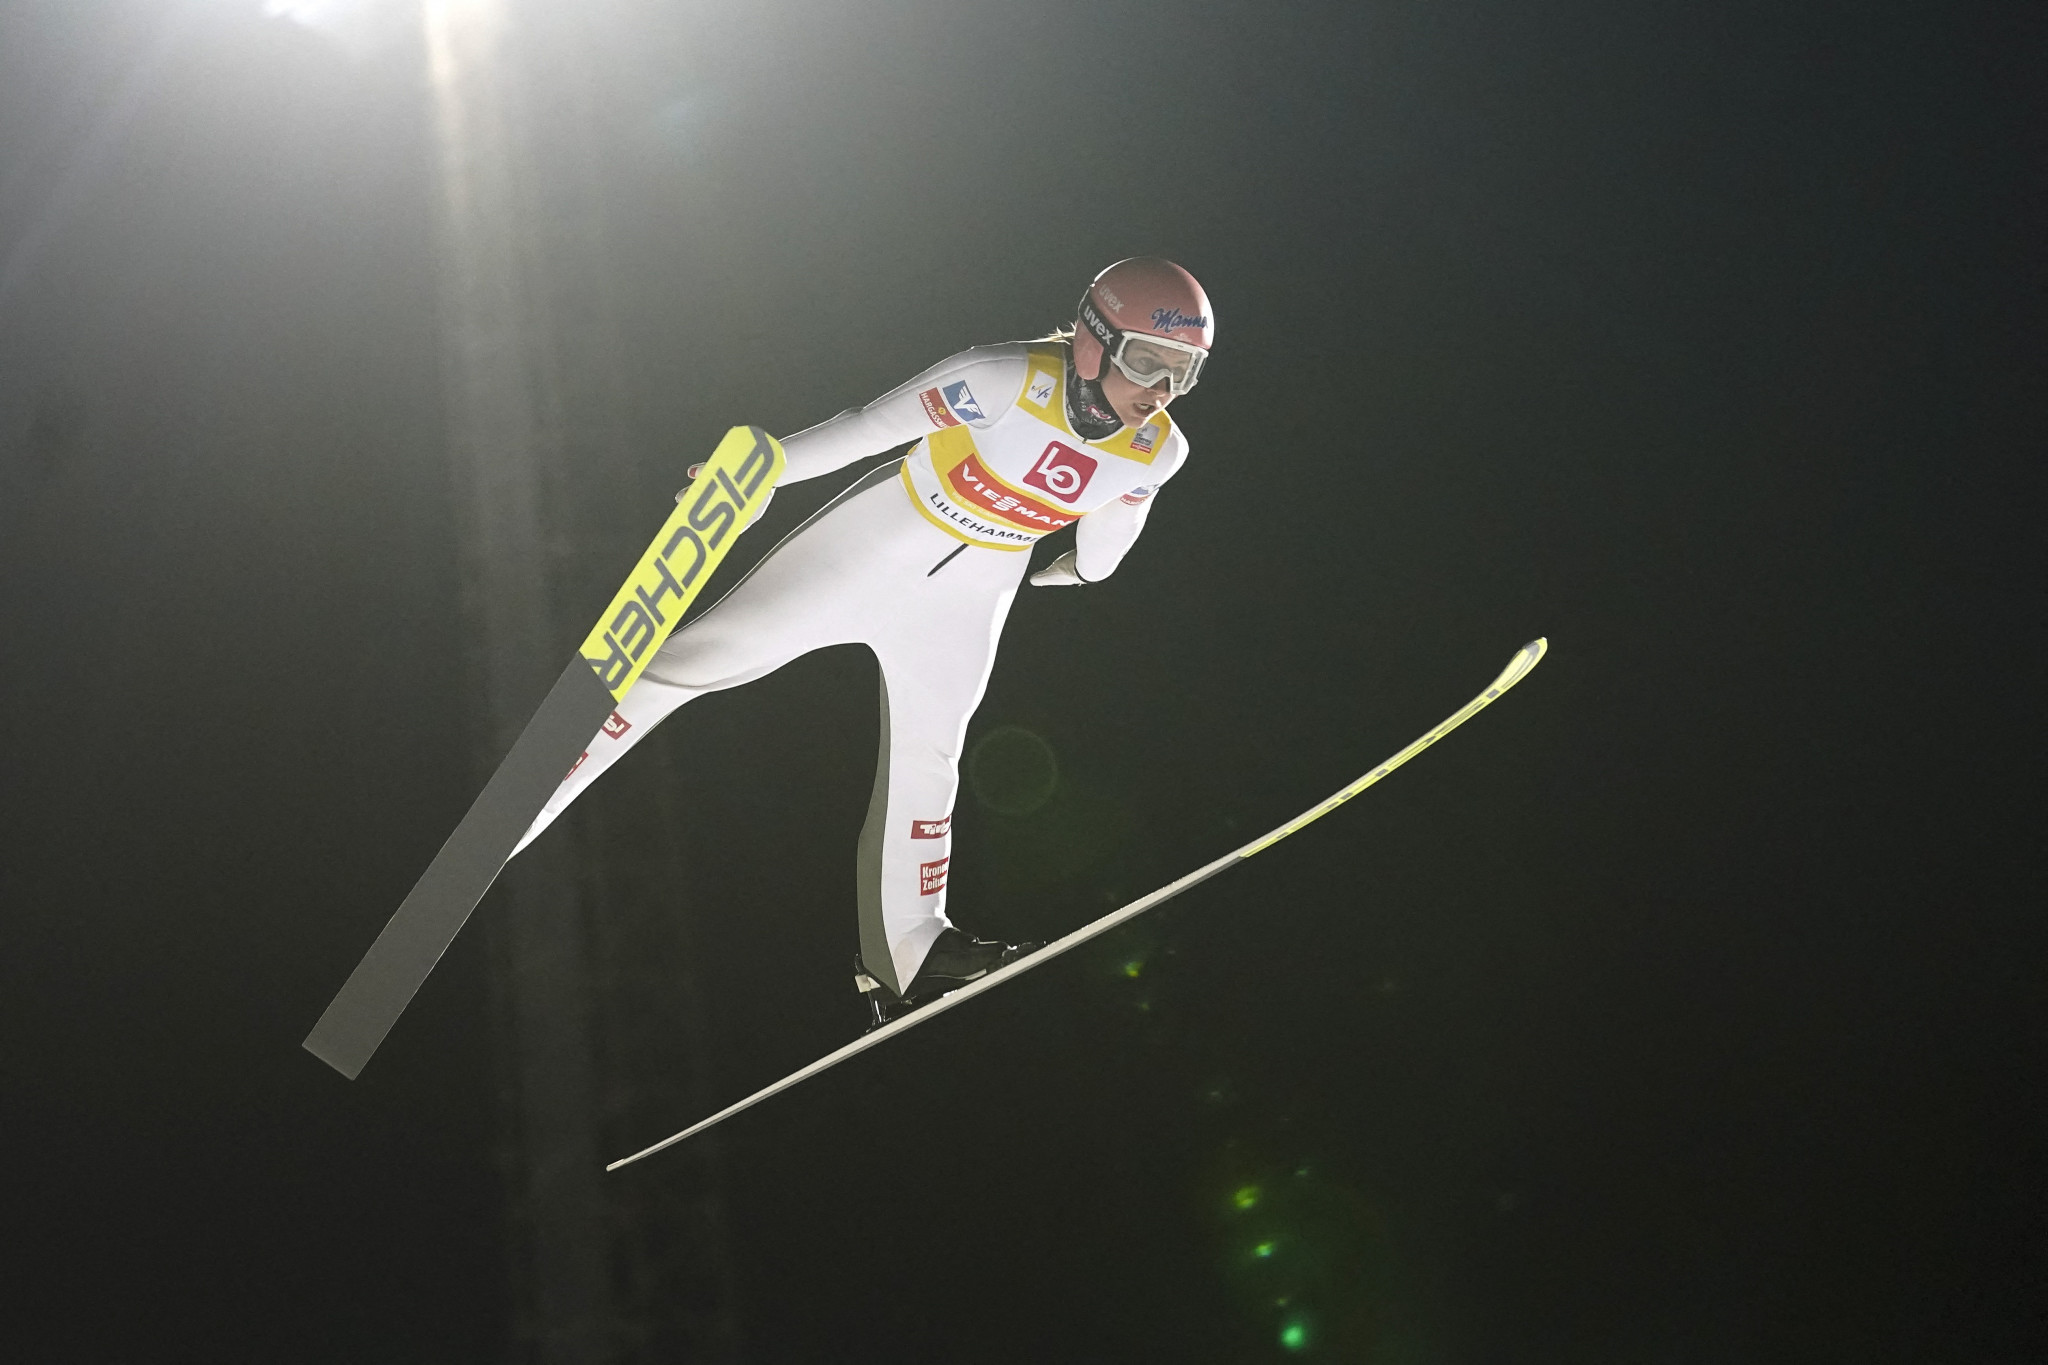 Kramer set to secure overall Ski Jumping World Cup title in Oberhof